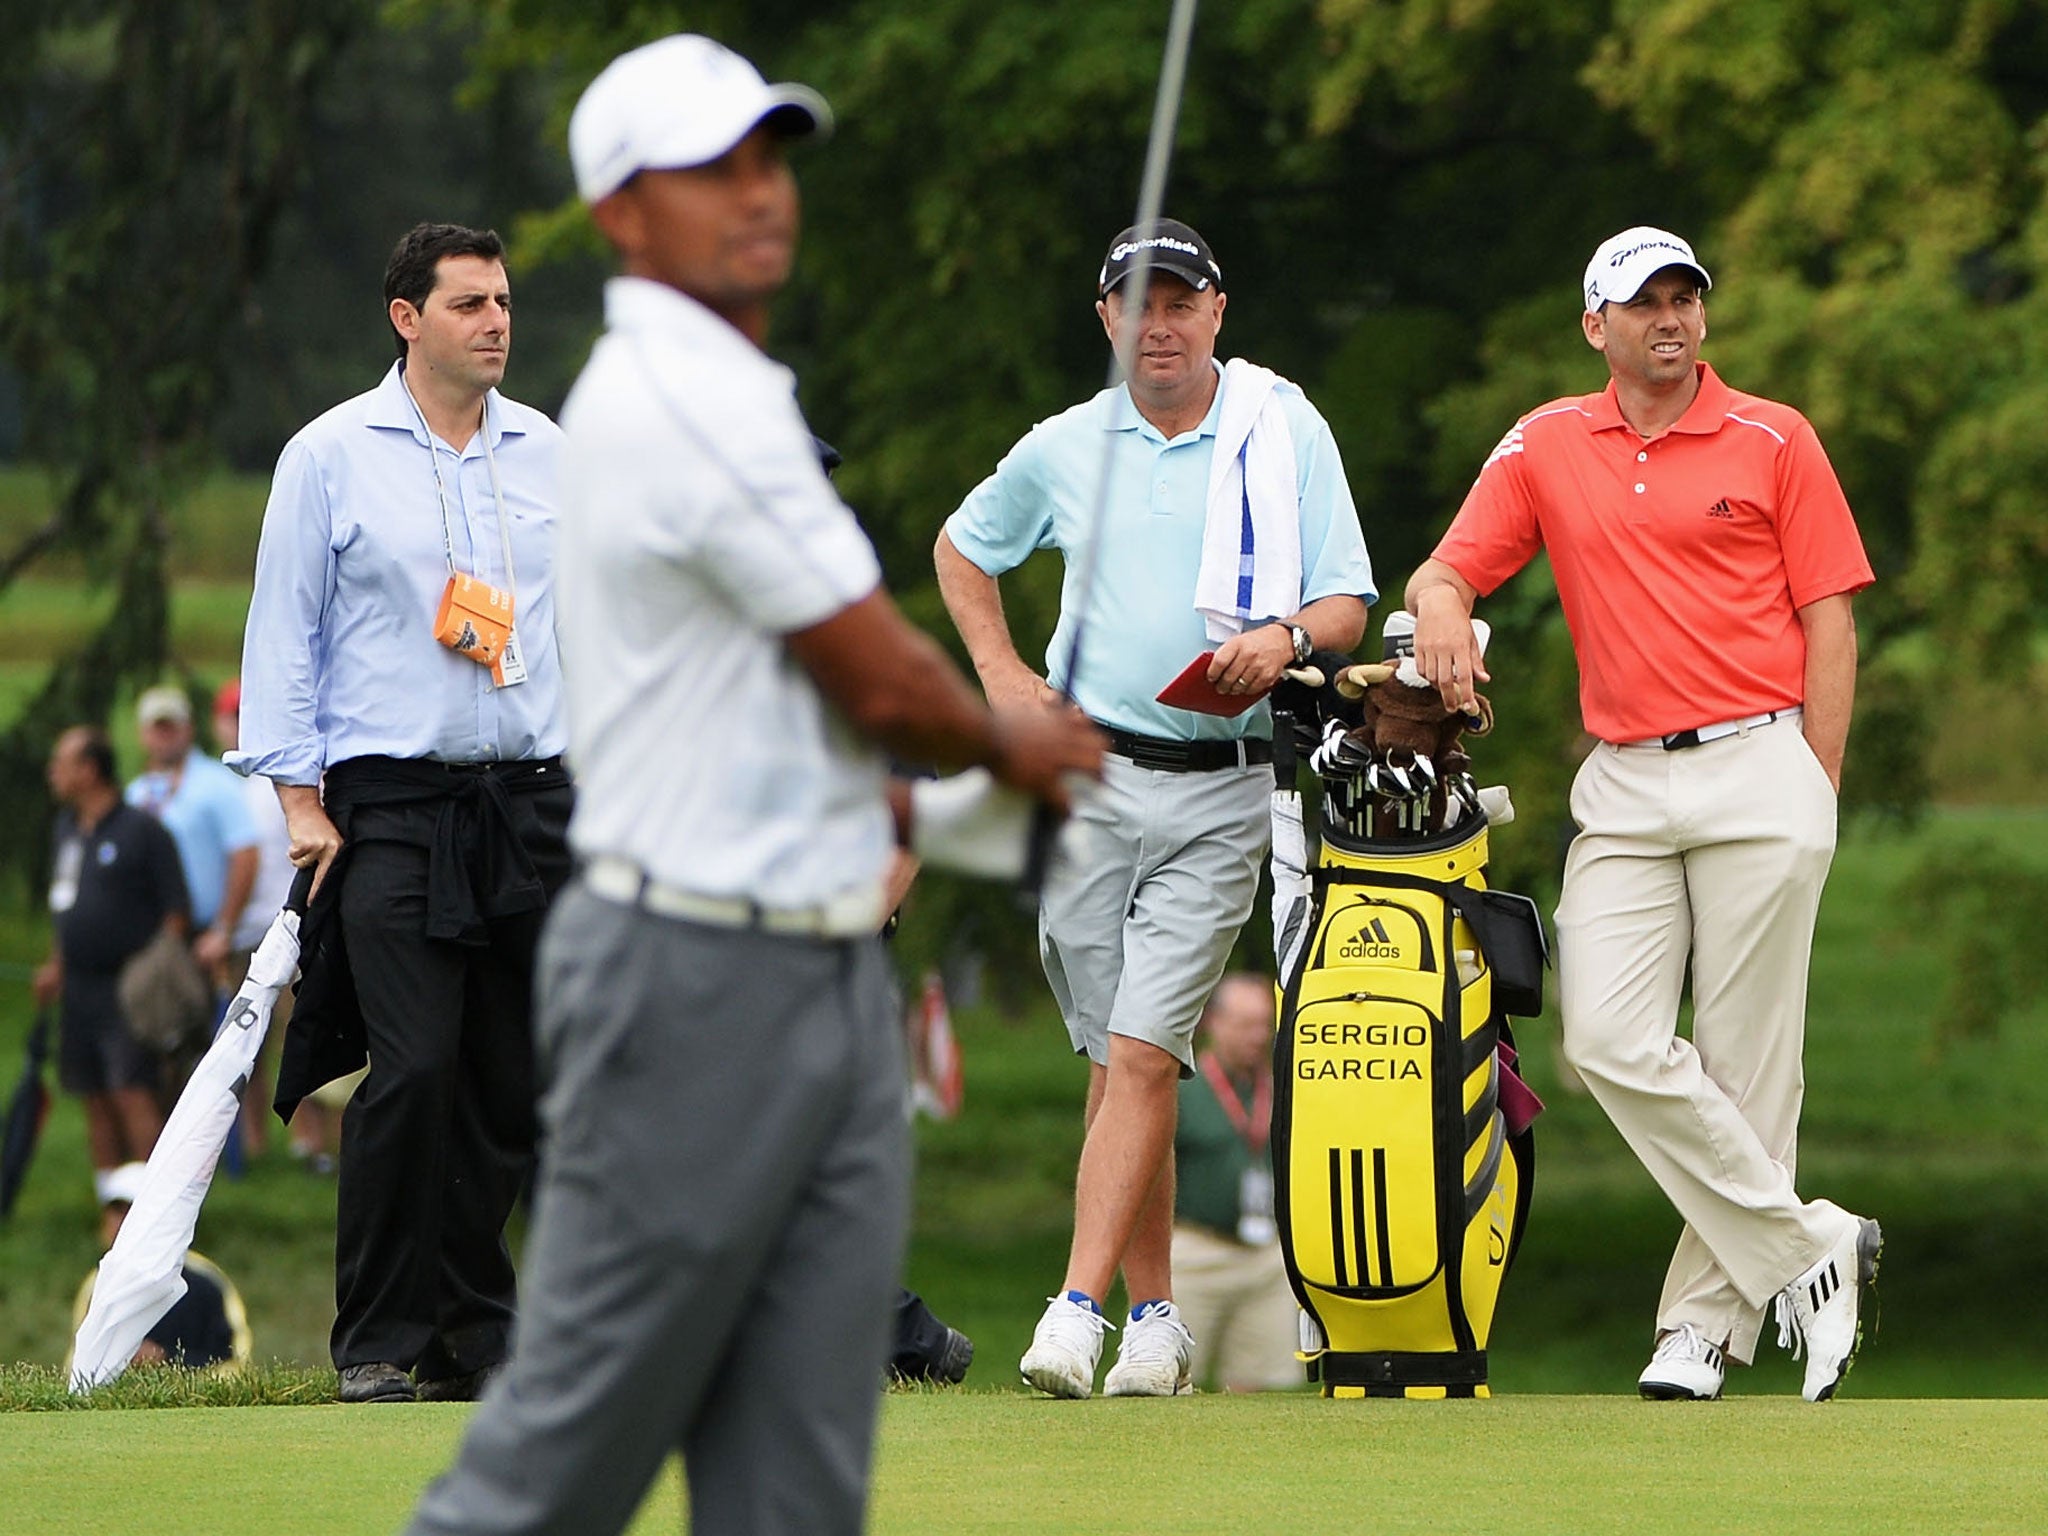 Sergio Garcia (right) watches Tiger Woods hit a shot on the practice range at Merion Golf Club